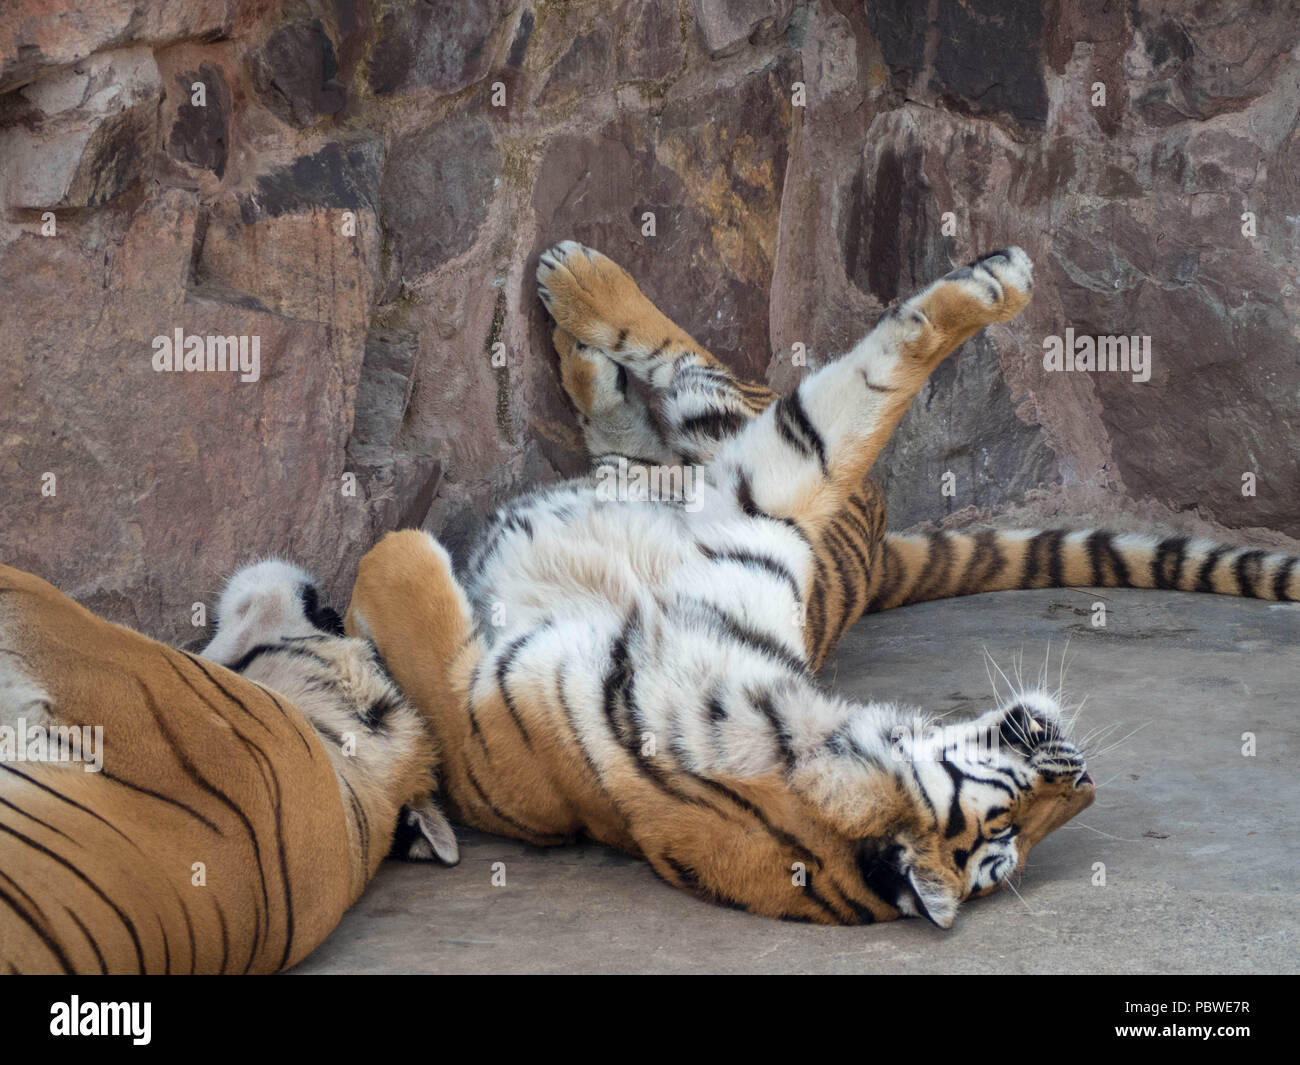 Shanghai, Shanghai, China. 30th July, 2018. Shanghai, CHINA-Siberian tigers at Heping Park in Shanghai, China. Credit: SIPA Asia/ZUMA Wire/Alamy Live News Stock Photo